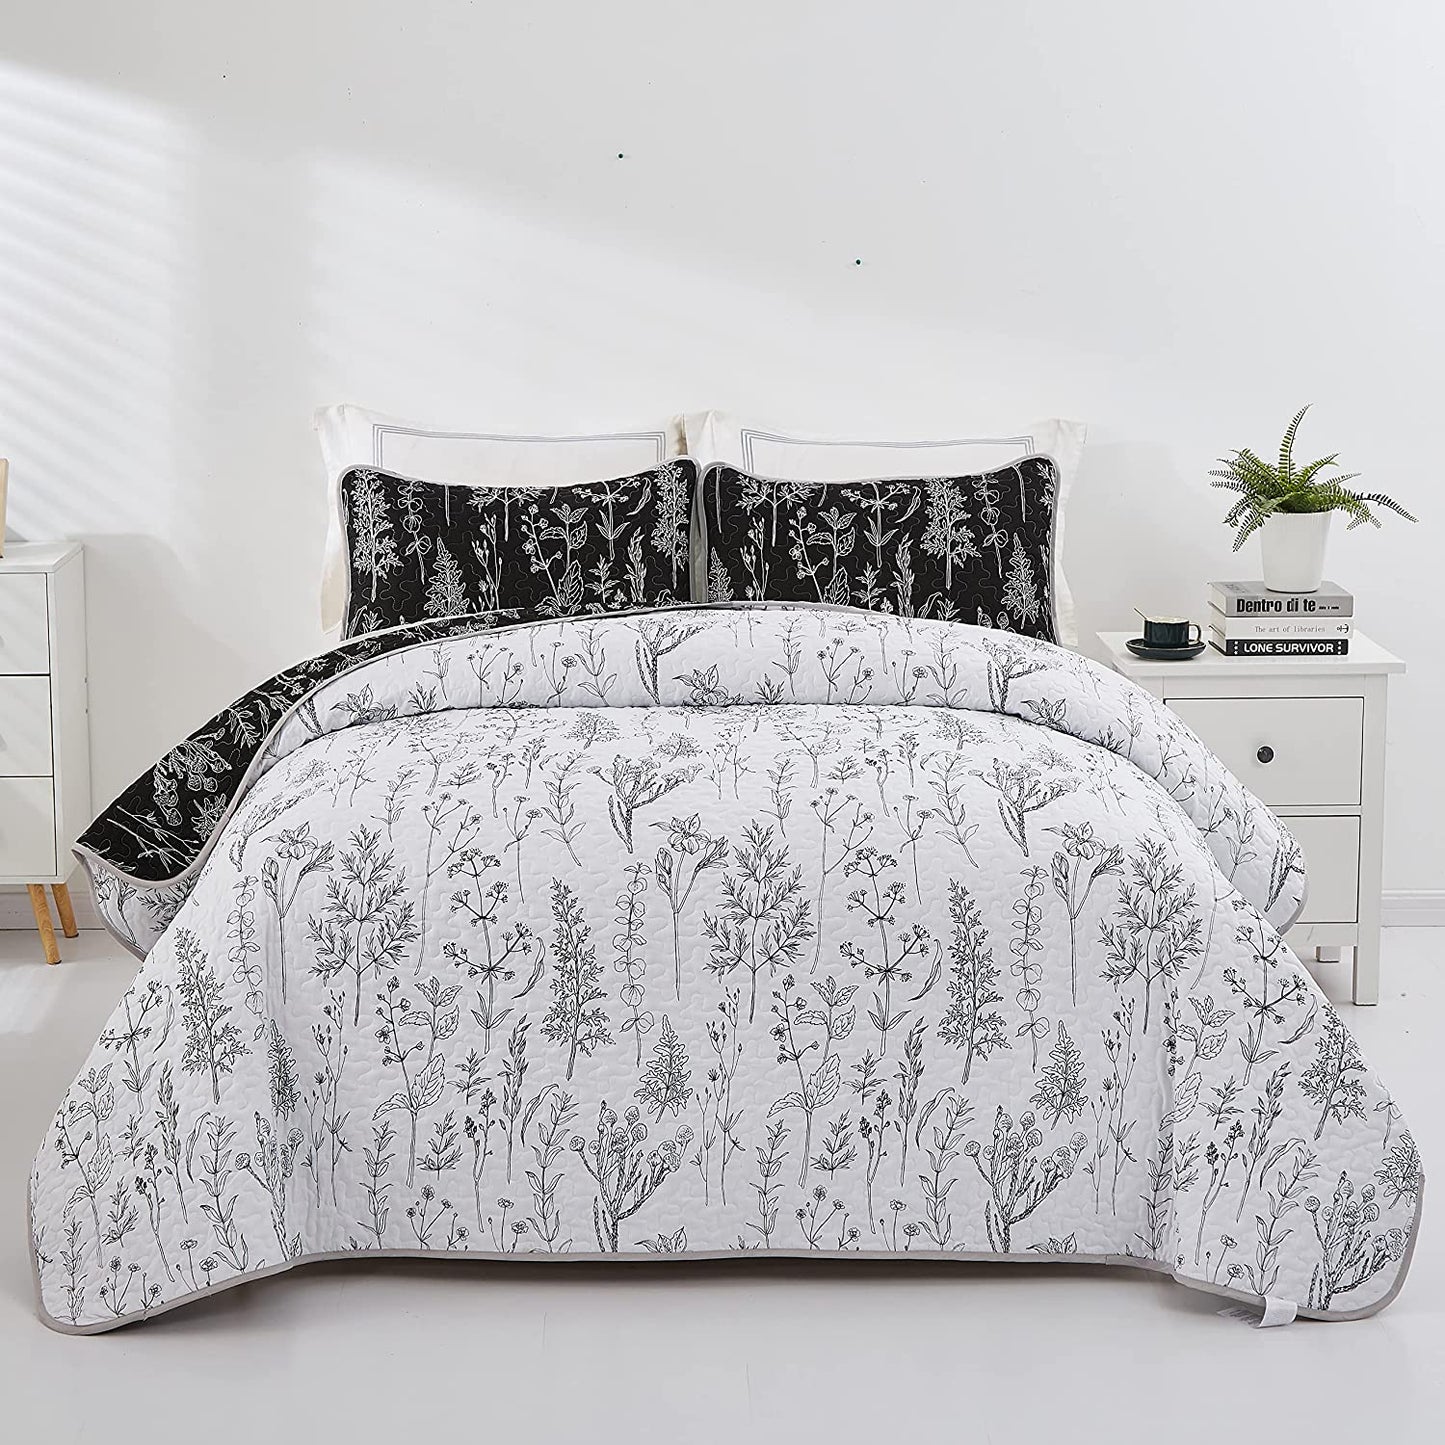 Black and White Quilt Set 3 Pieces Flowers Botanical Plant Reversible Summer Lightweight Microfiber Bedspread with 2 Pillowcases